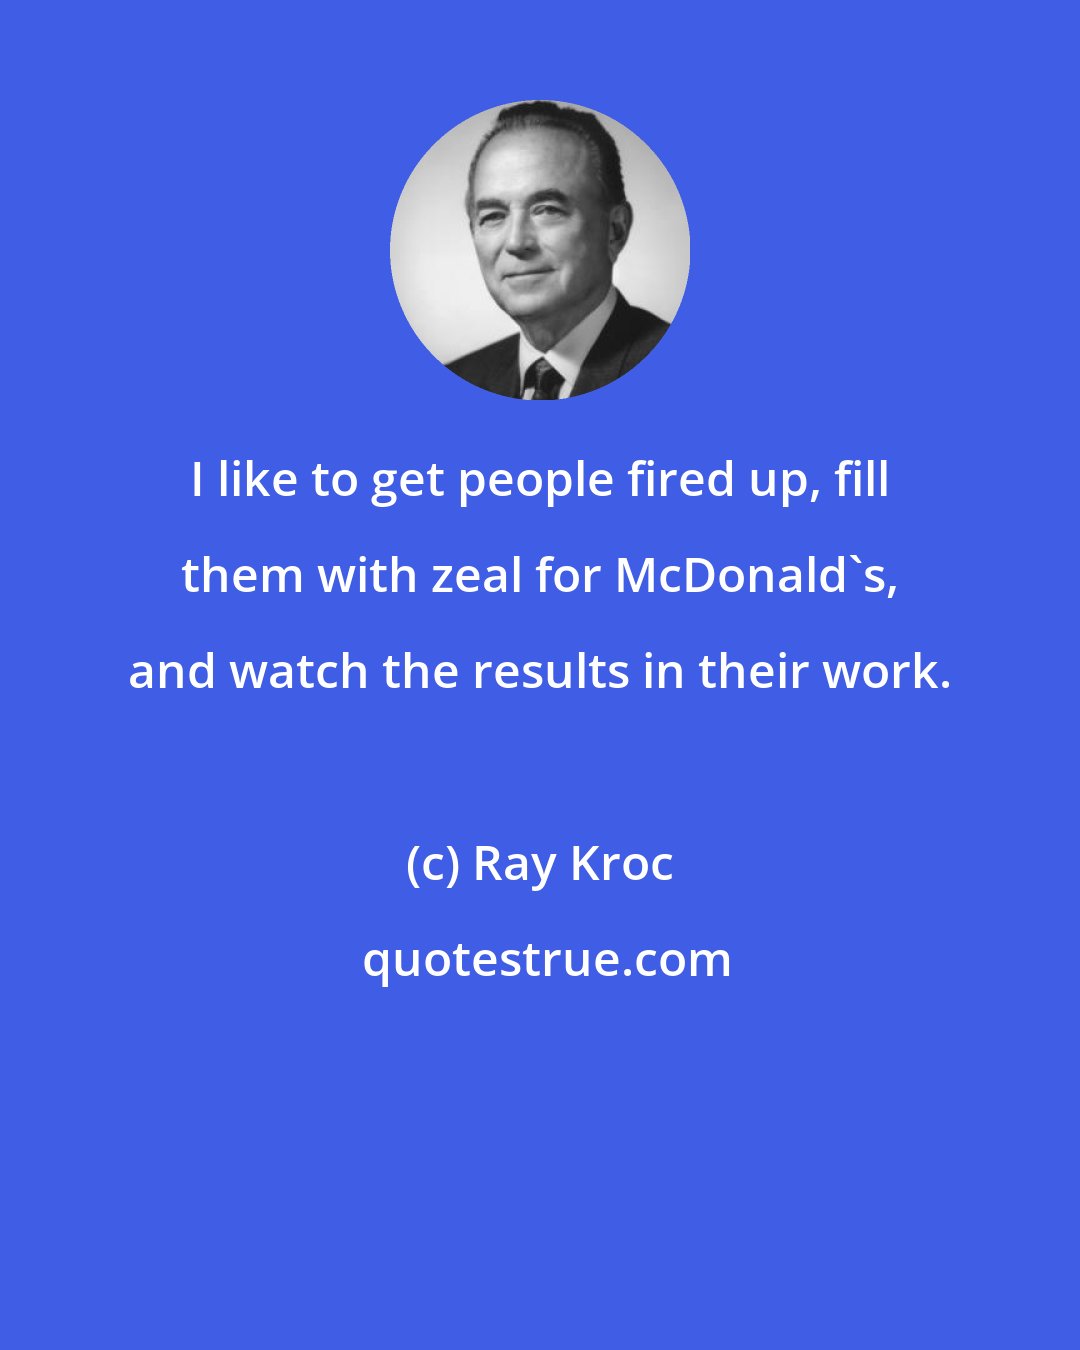 Ray Kroc: I like to get people fired up, fill them with zeal for McDonald's, and watch the results in their work.